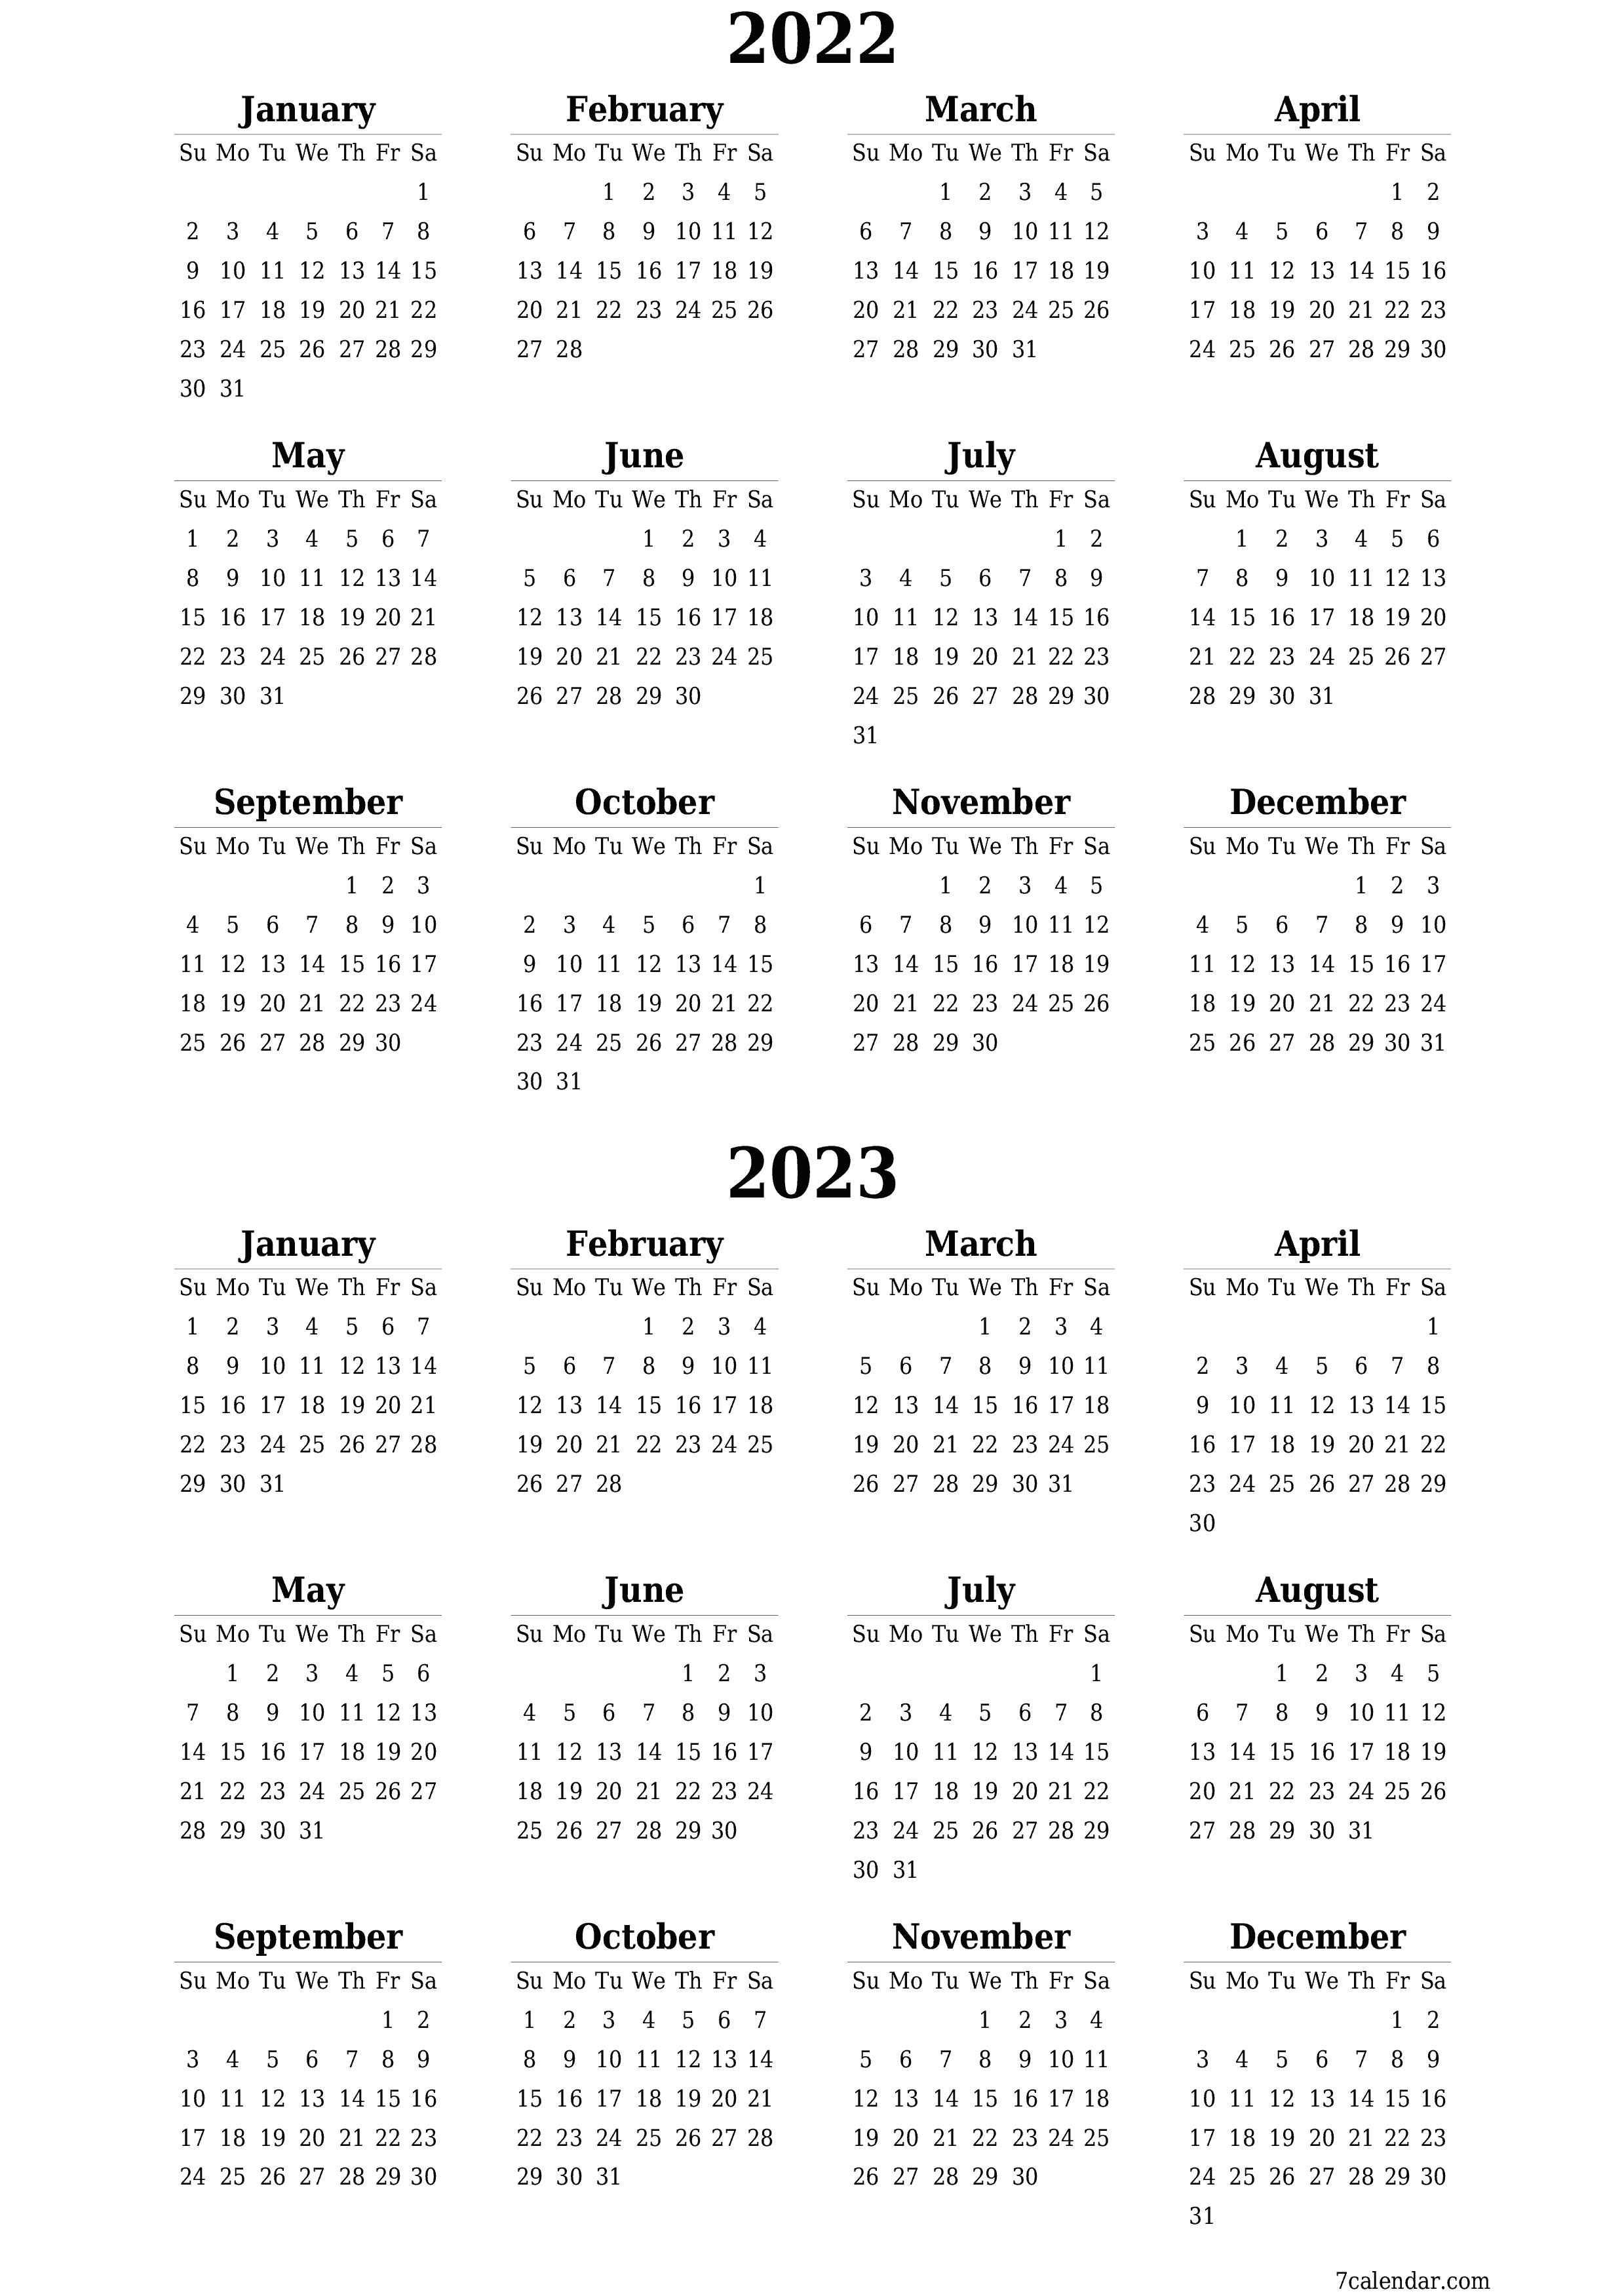 Blank yearly dated HD template image of calendar for year 2022, 2023 save and print to PDF PNG English - 7calendar.com